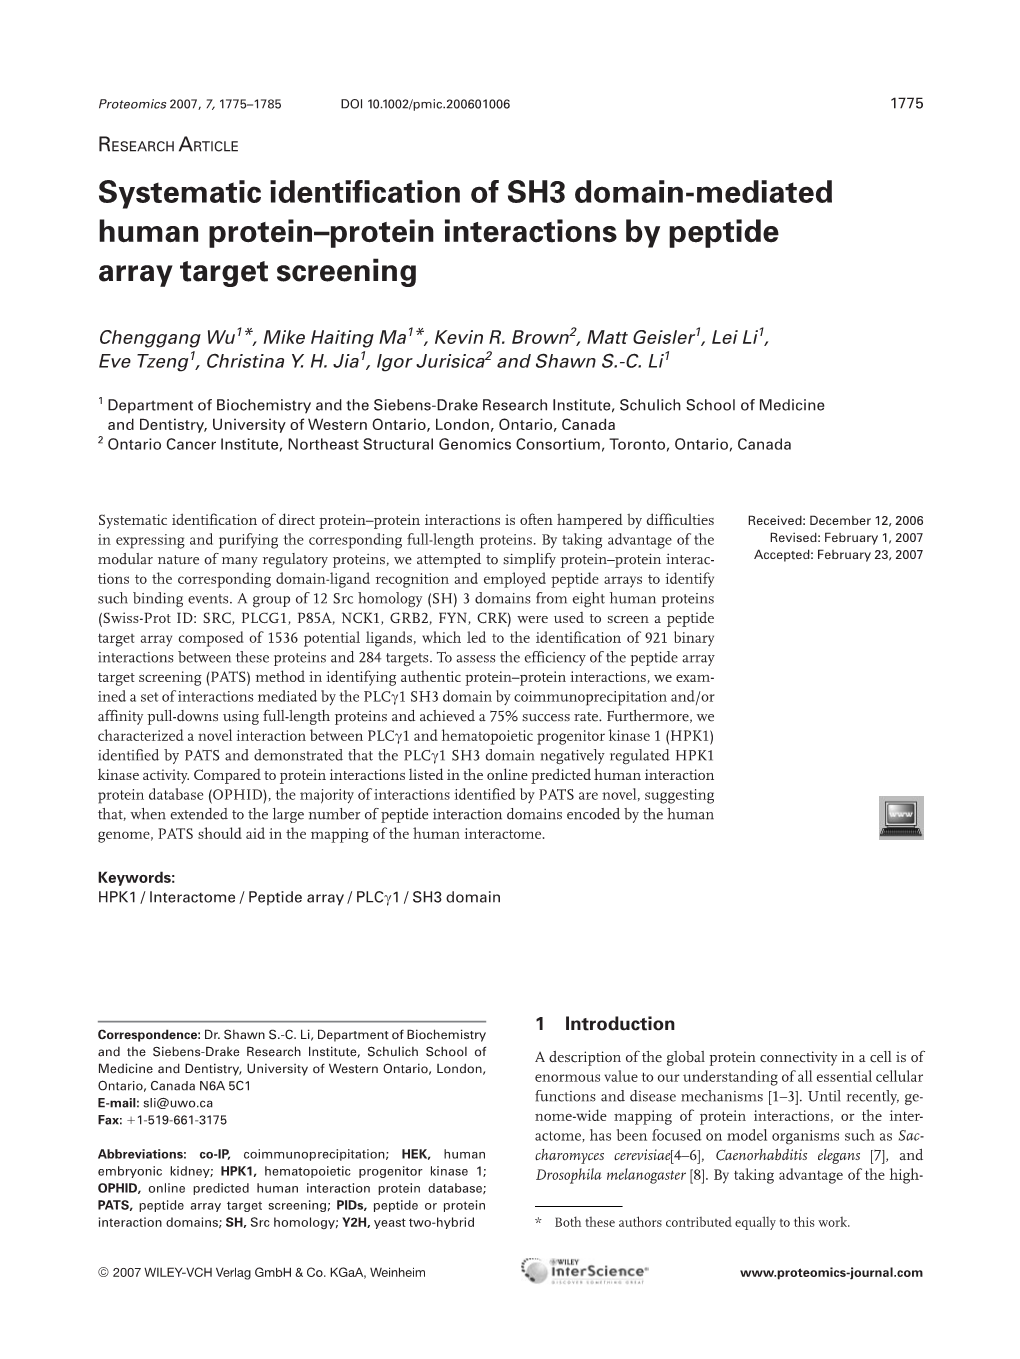 Systematic Identification of SH3 Domain-Mediated Human Protein–Protein Interactions by Peptide Array Target Screening